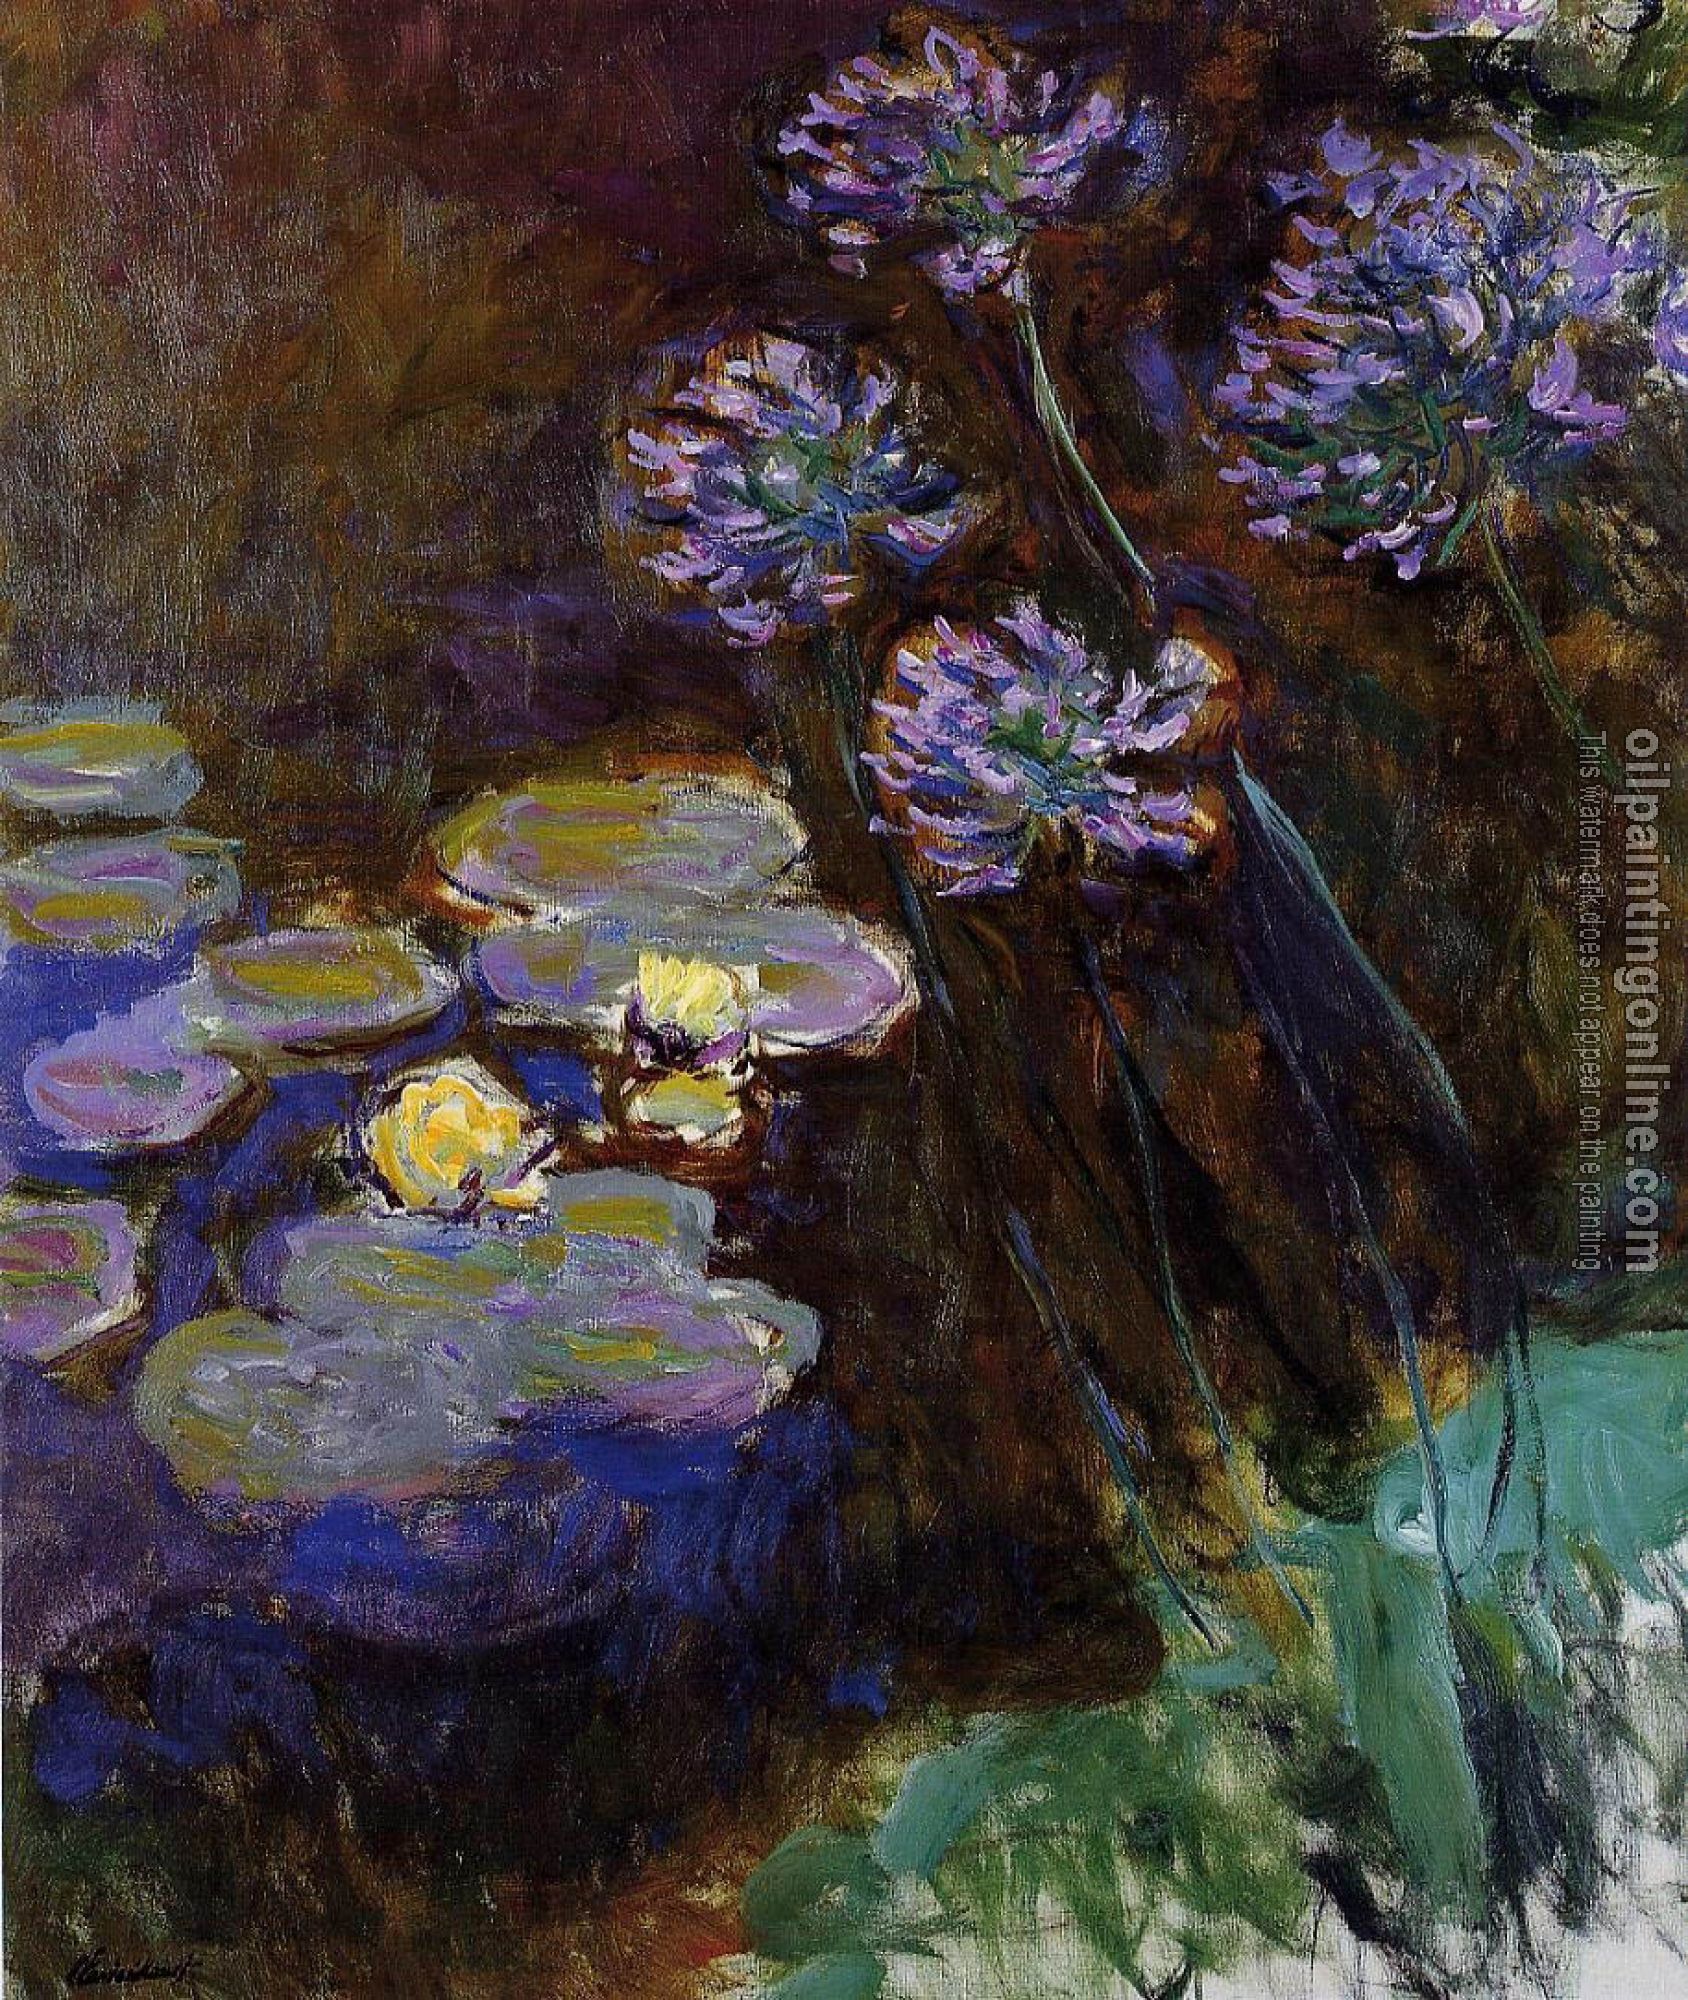 Monet, Claude Oscar - Water-Lilies and Agapanthus